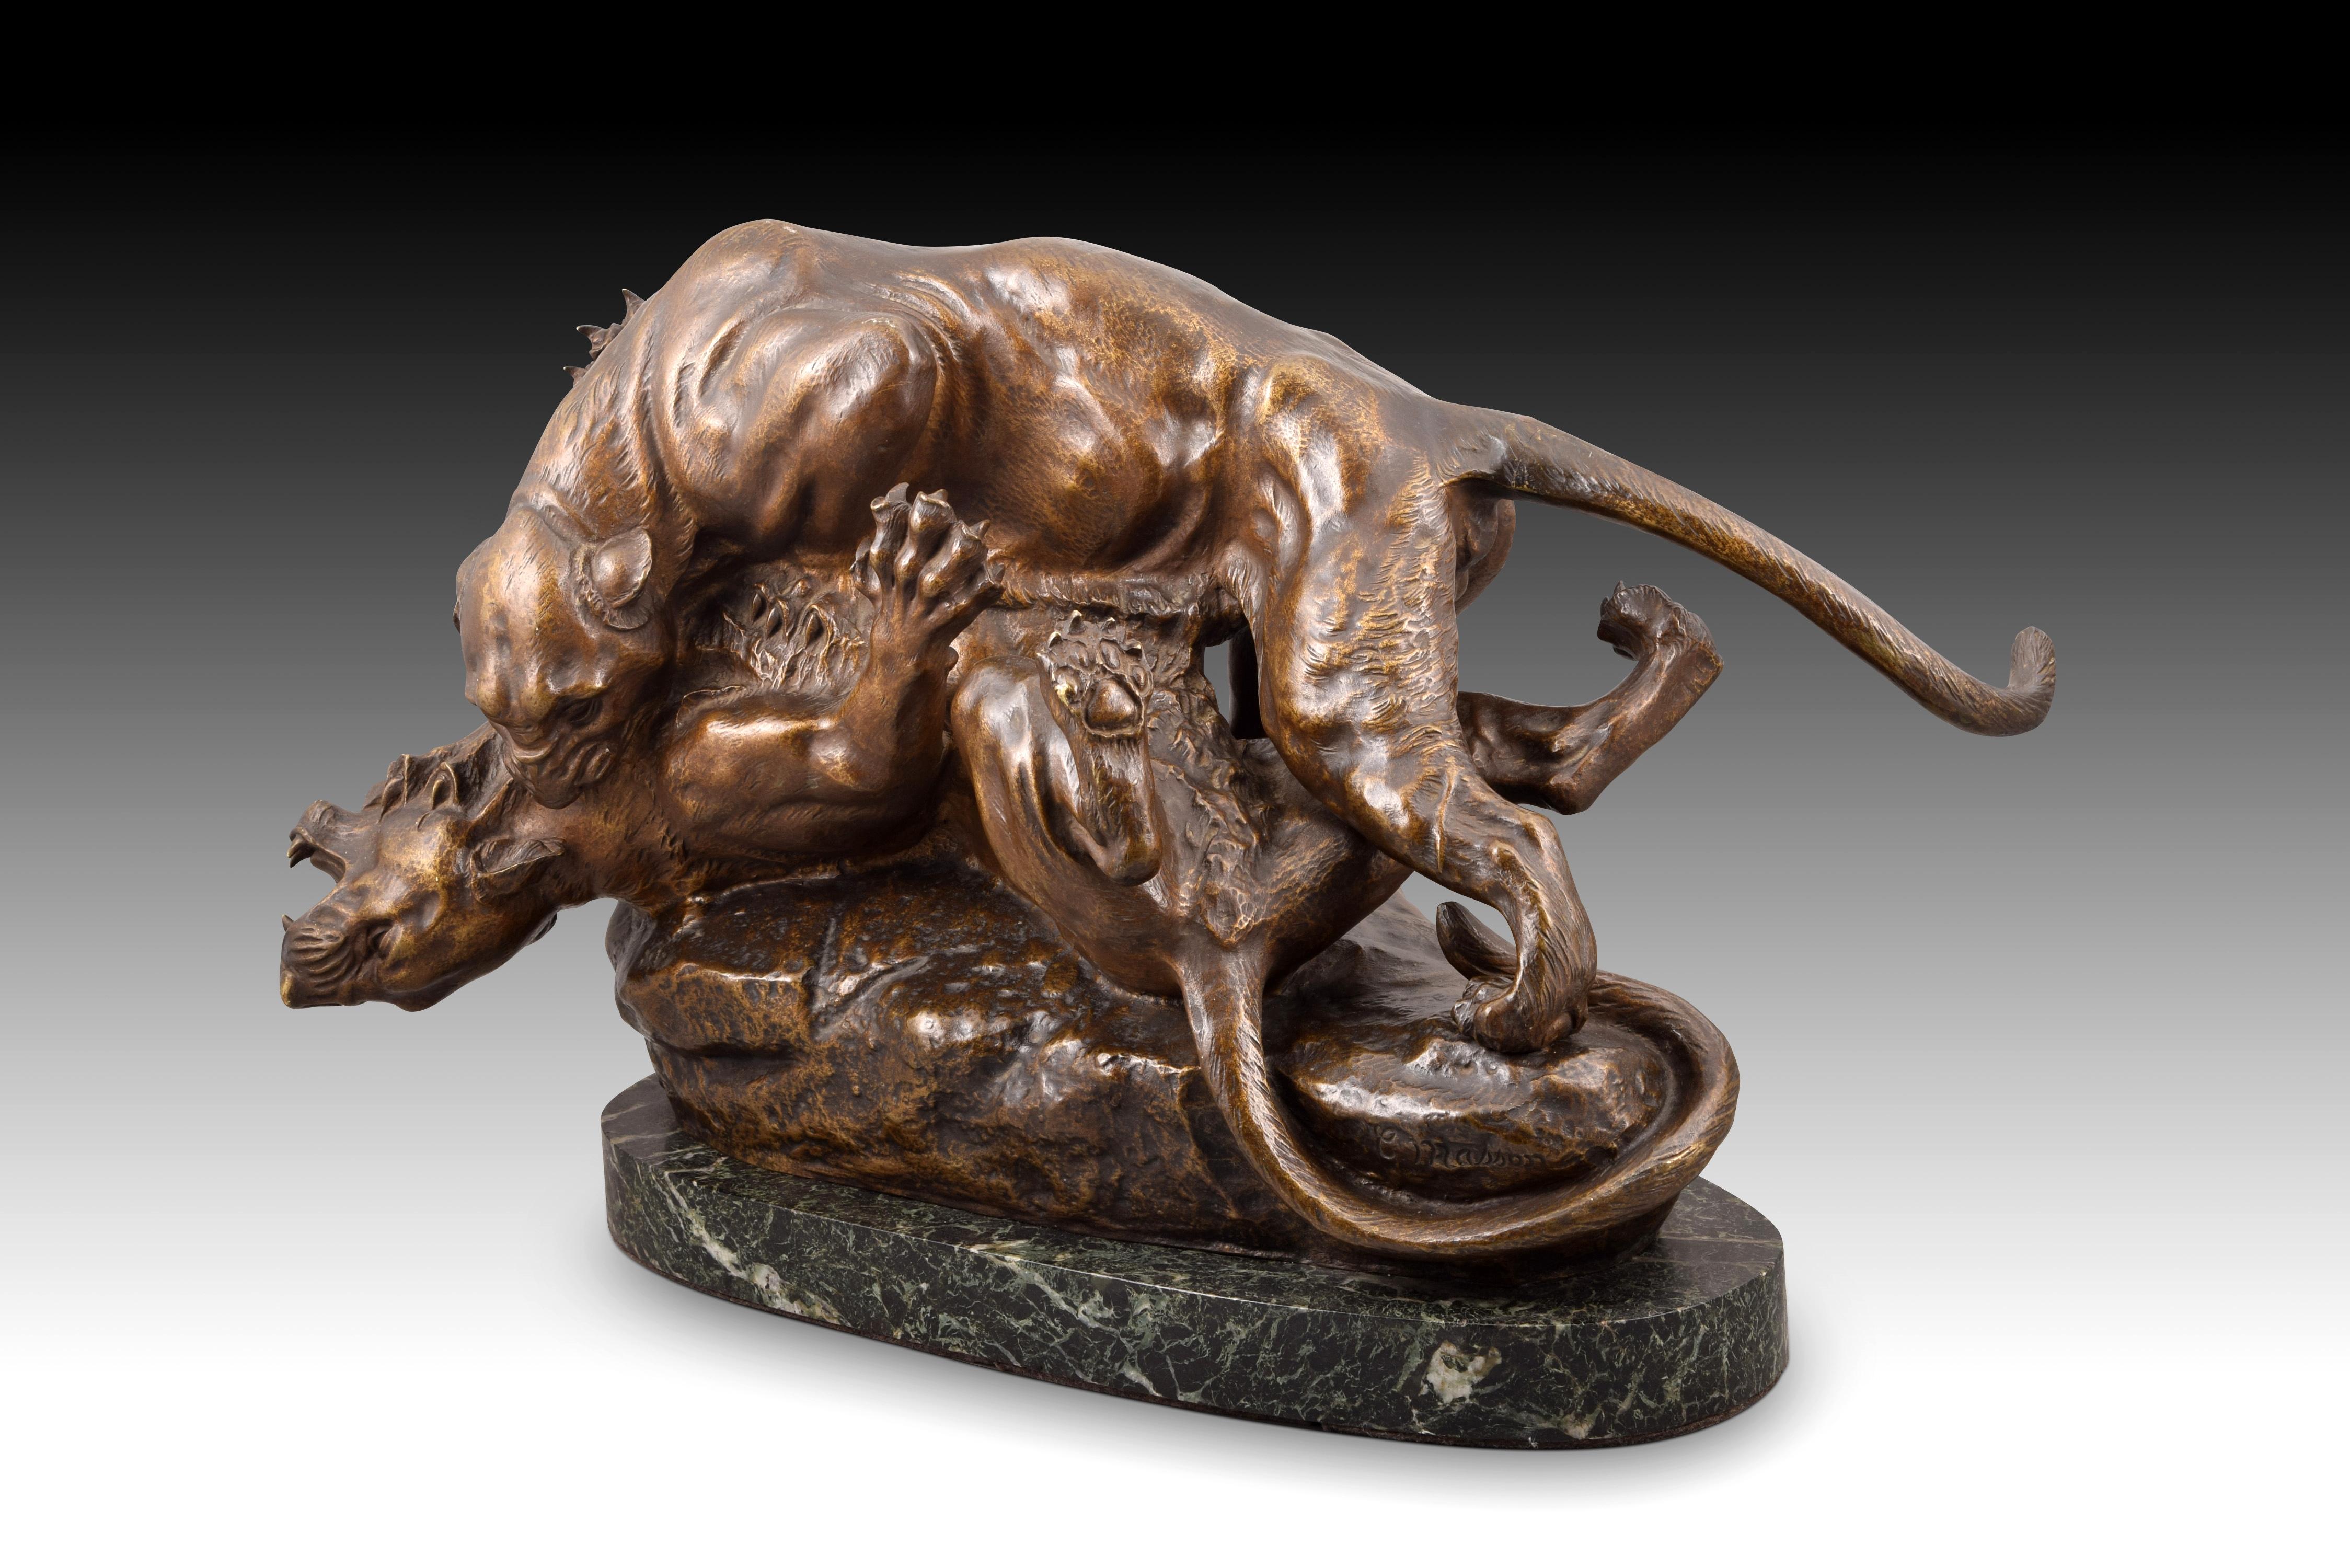 Grip. Blued bronze, marble. France, towards the end of the 19th century. 
Blued bronze sculpture on an oval marble base veined in green tones that shows two lionesses or two panthers immersed in a fight, one biting the neck of the other and both